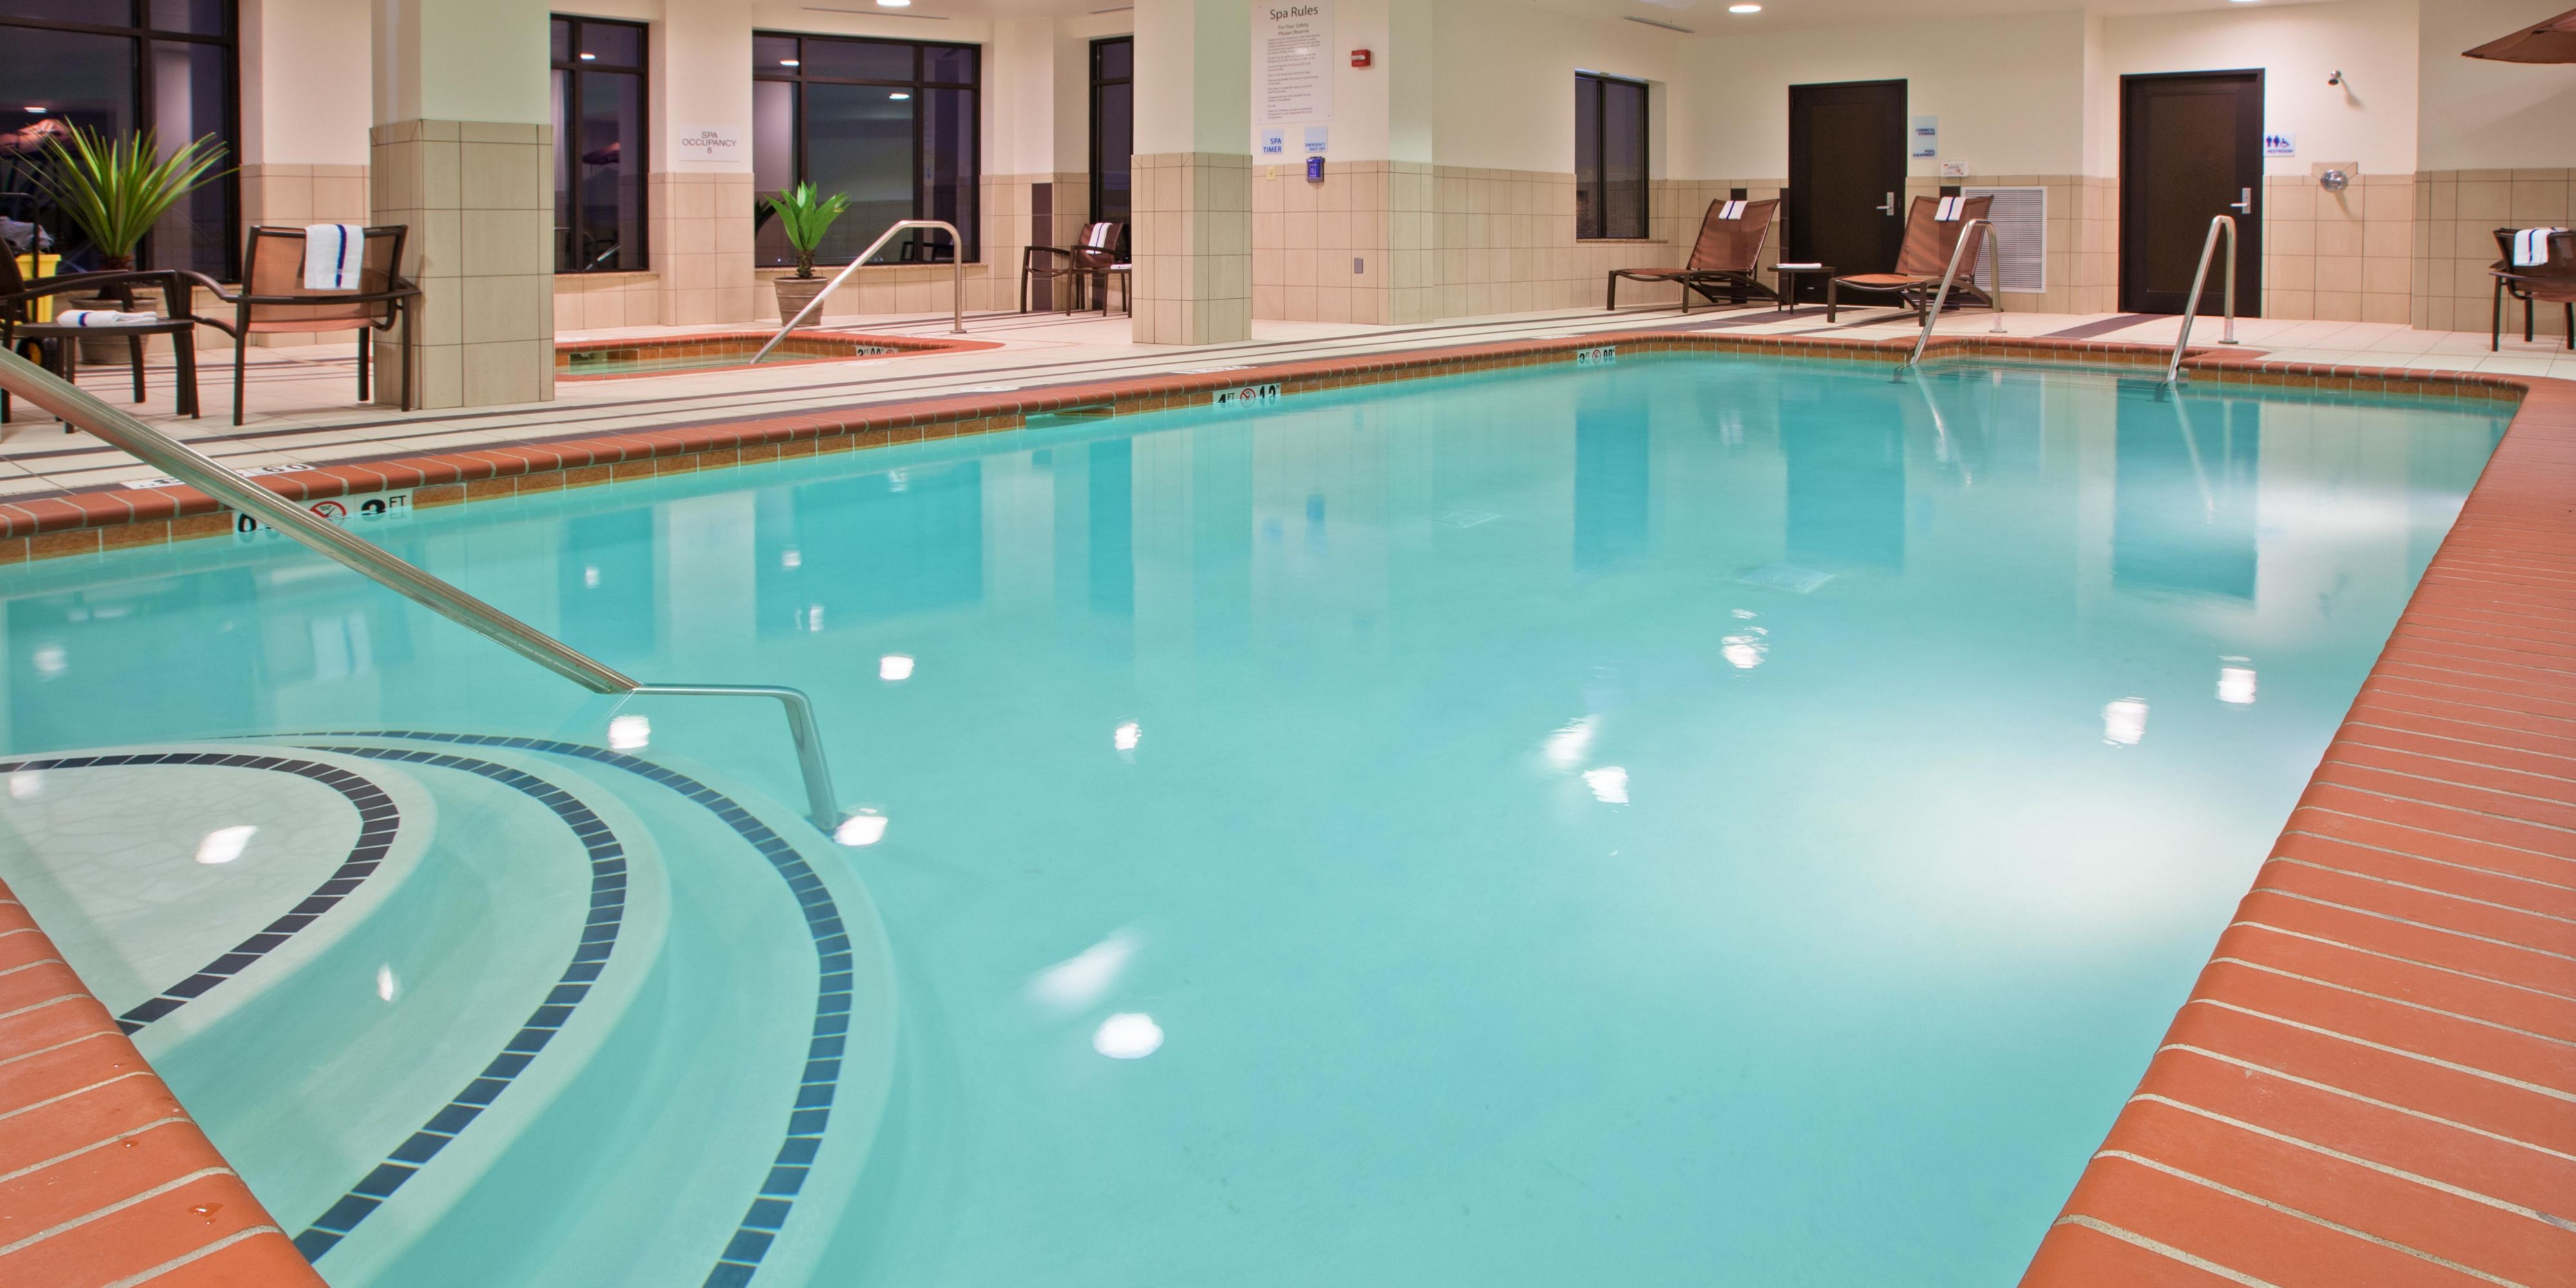 Come relax in our hot tub or splash around in our heated pool!